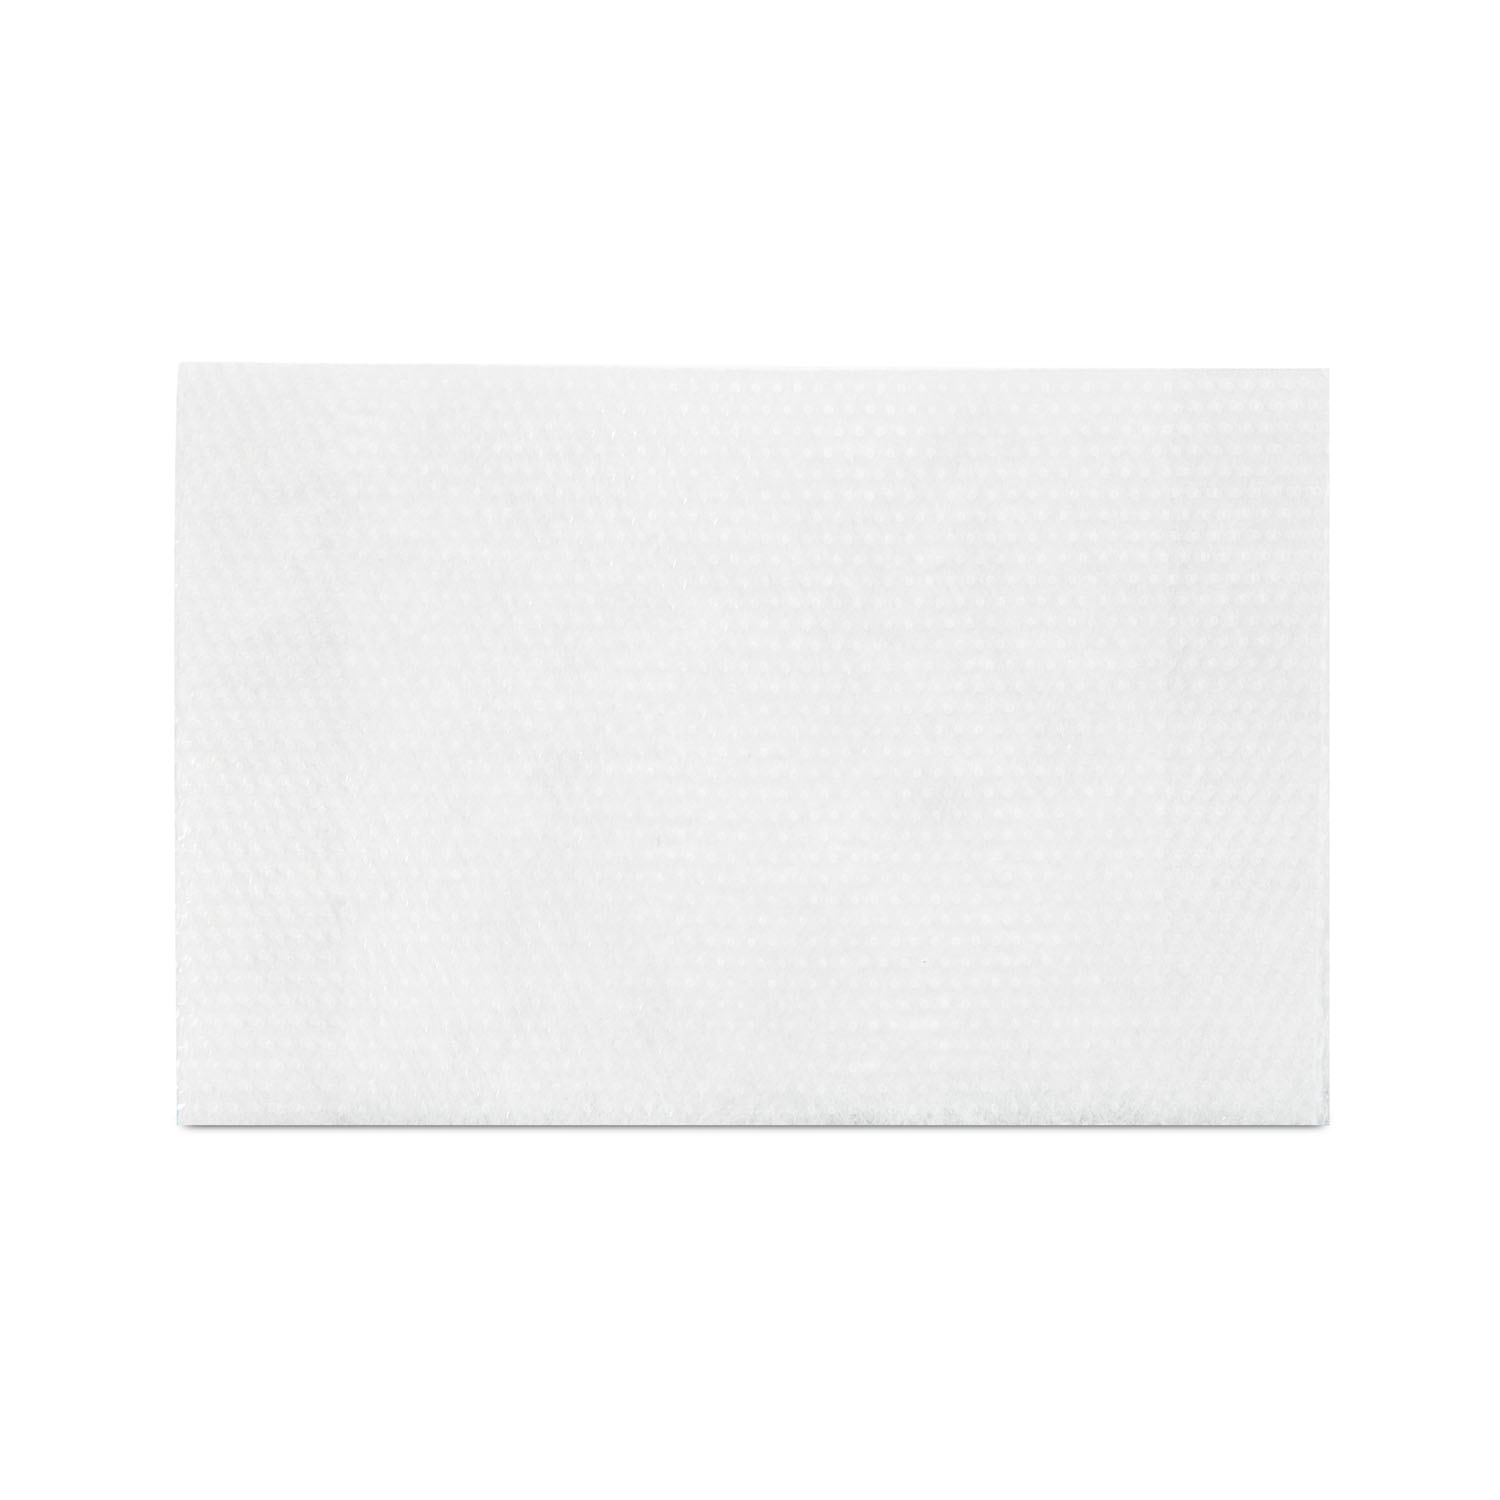 DUKAL NON-ADHERENT PAD WITH ADHESIVE : 7675033 BX $16.41 Stocked